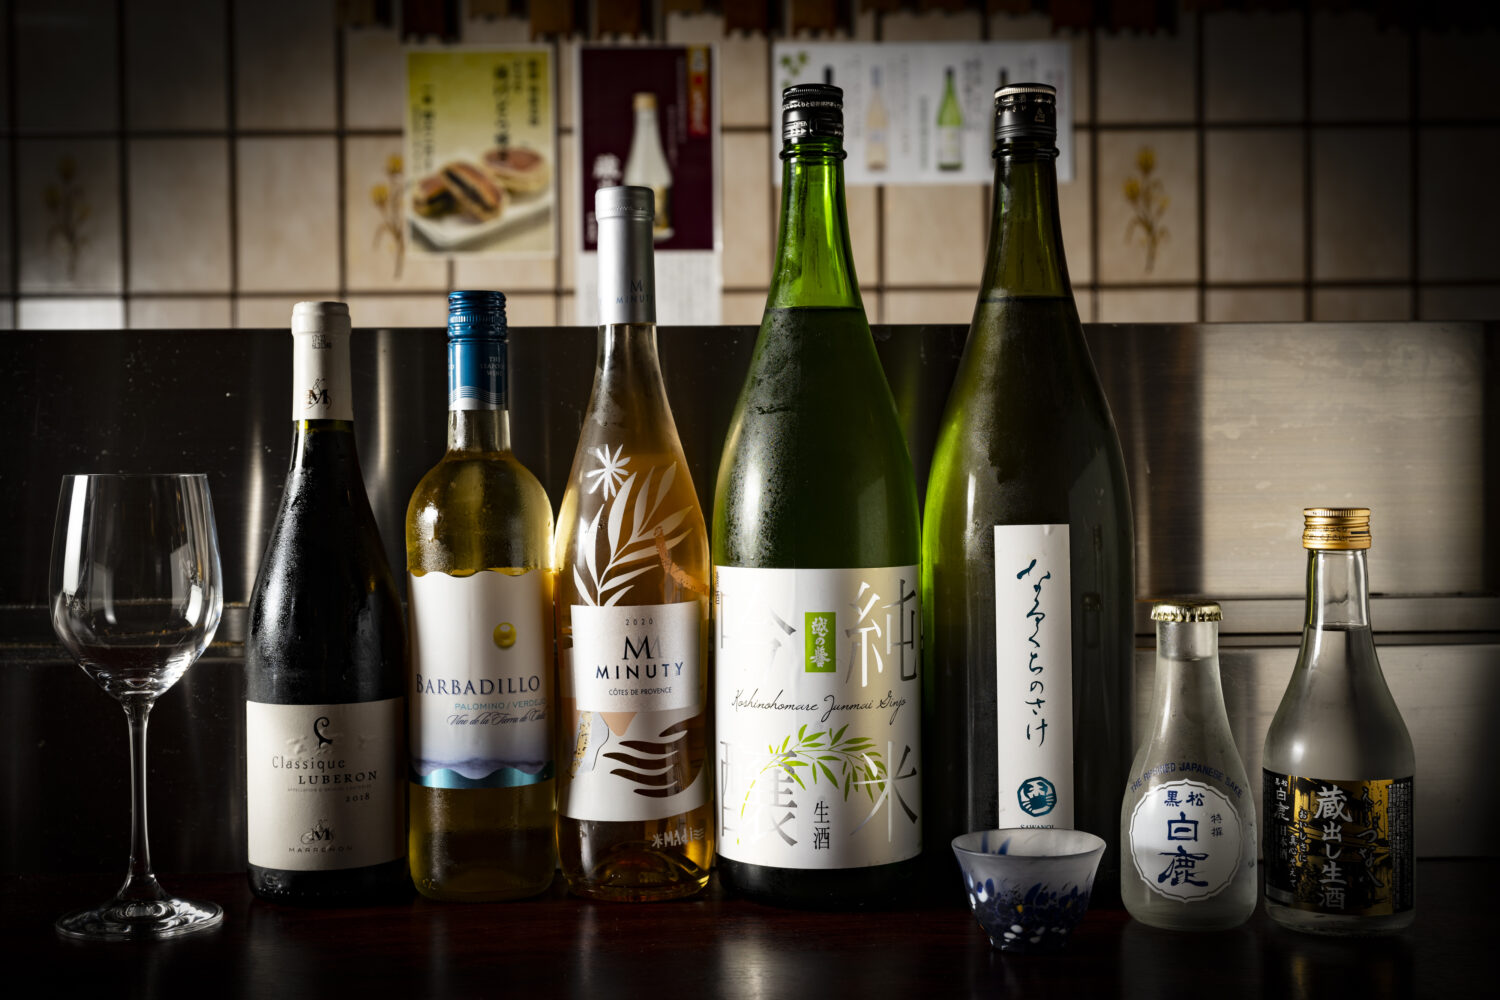 White wine is a recommended pairing with tempura